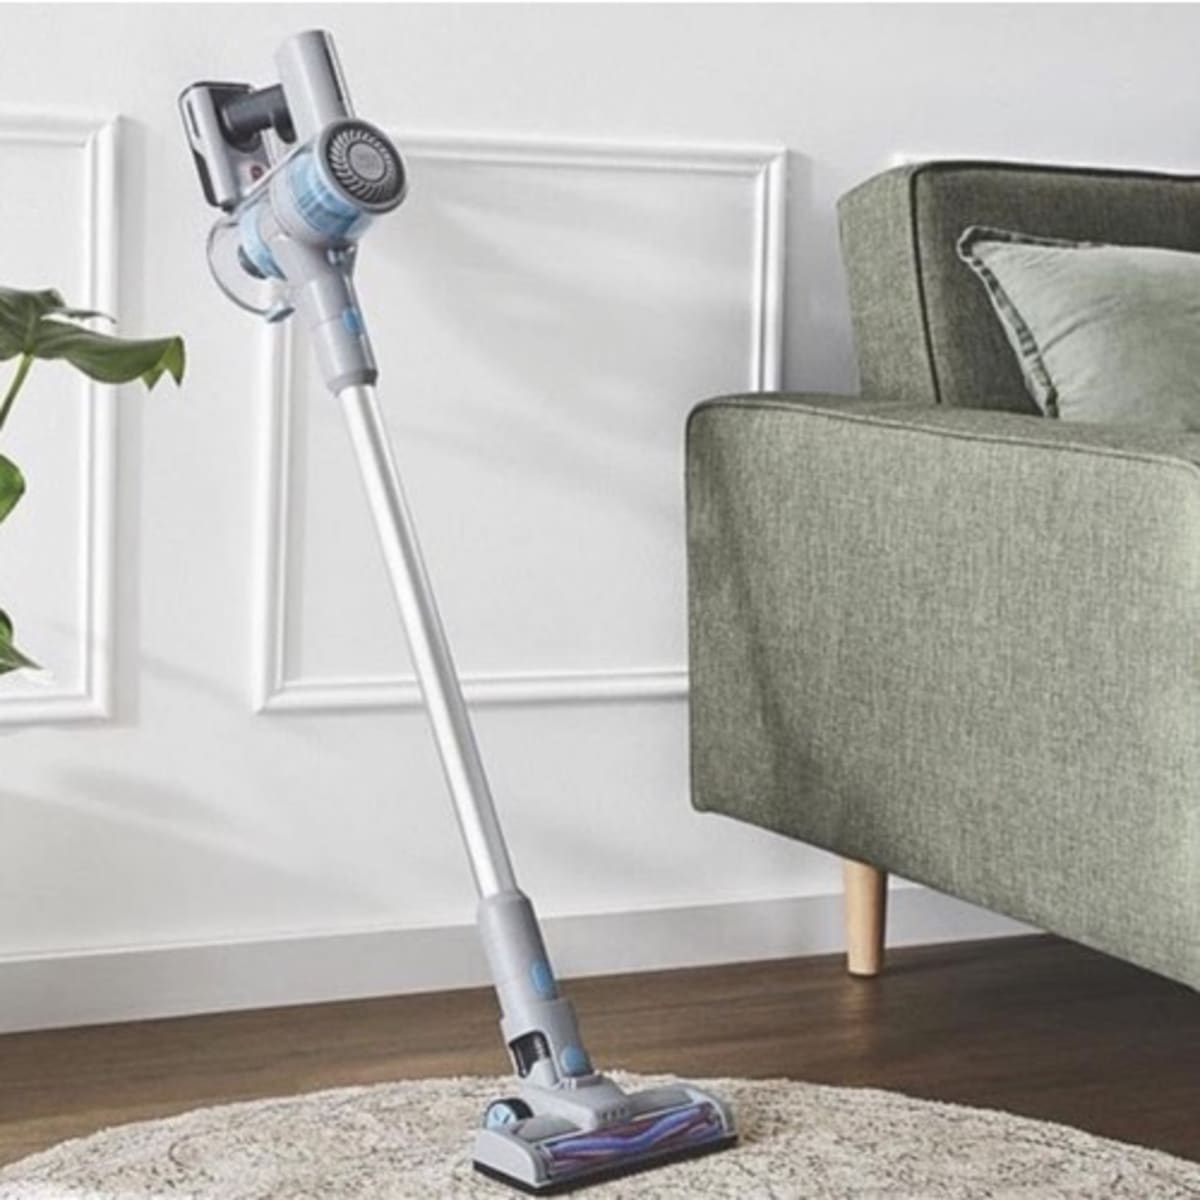 Easy Home Cordless Cyclonic Stick Vacuum -2 In 1